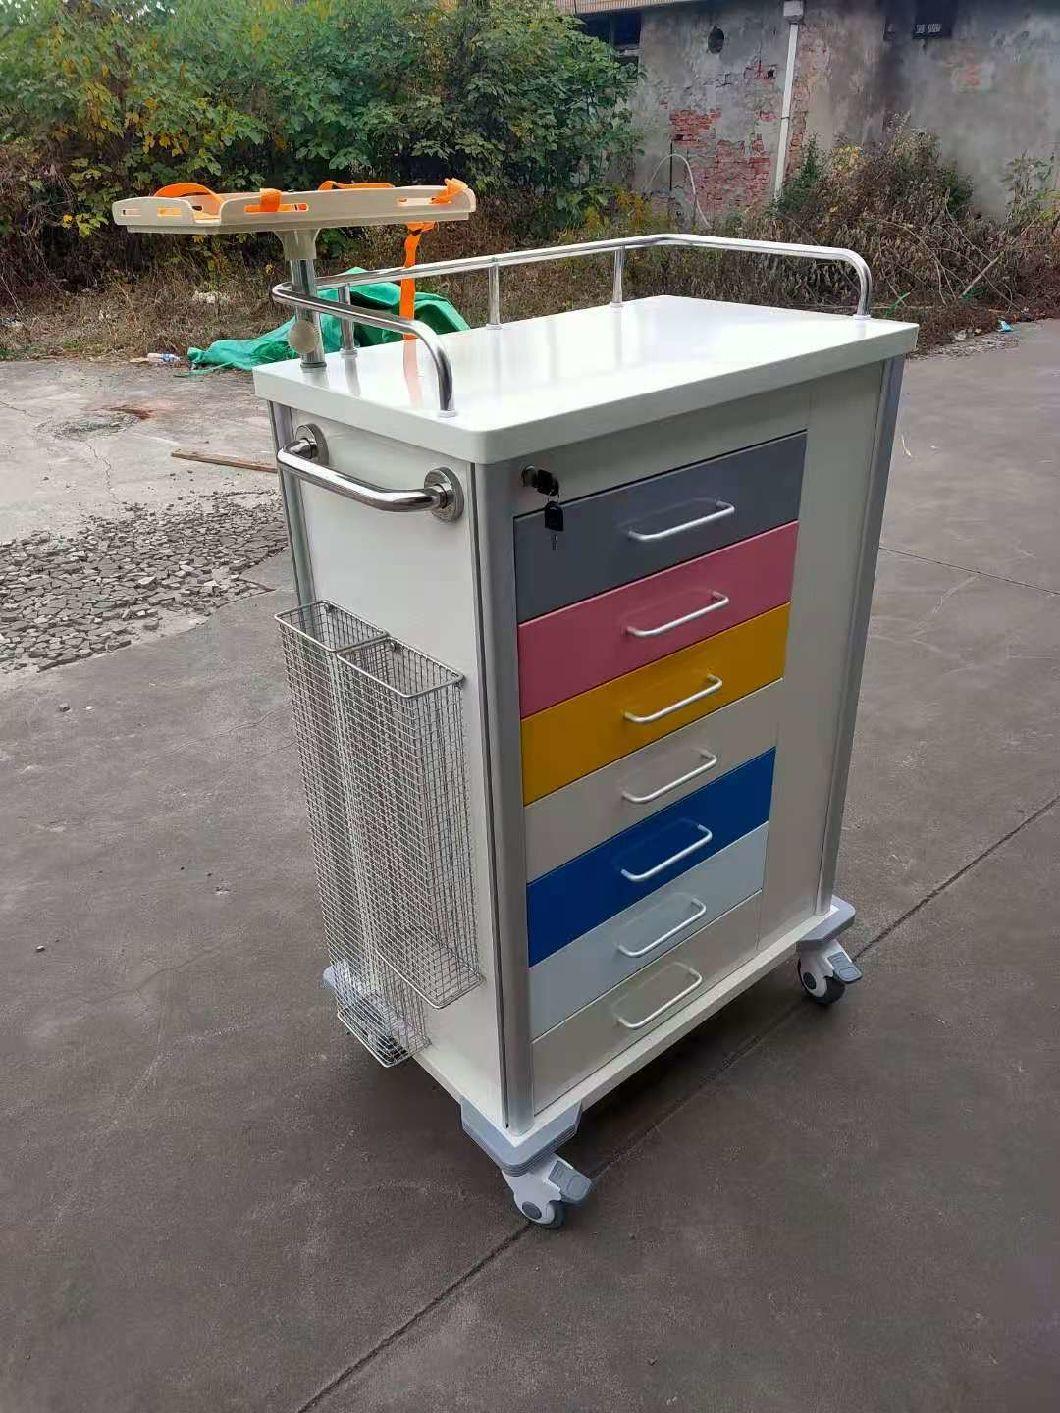 Top Quality ABS Medical Emergency Trolley for Sale